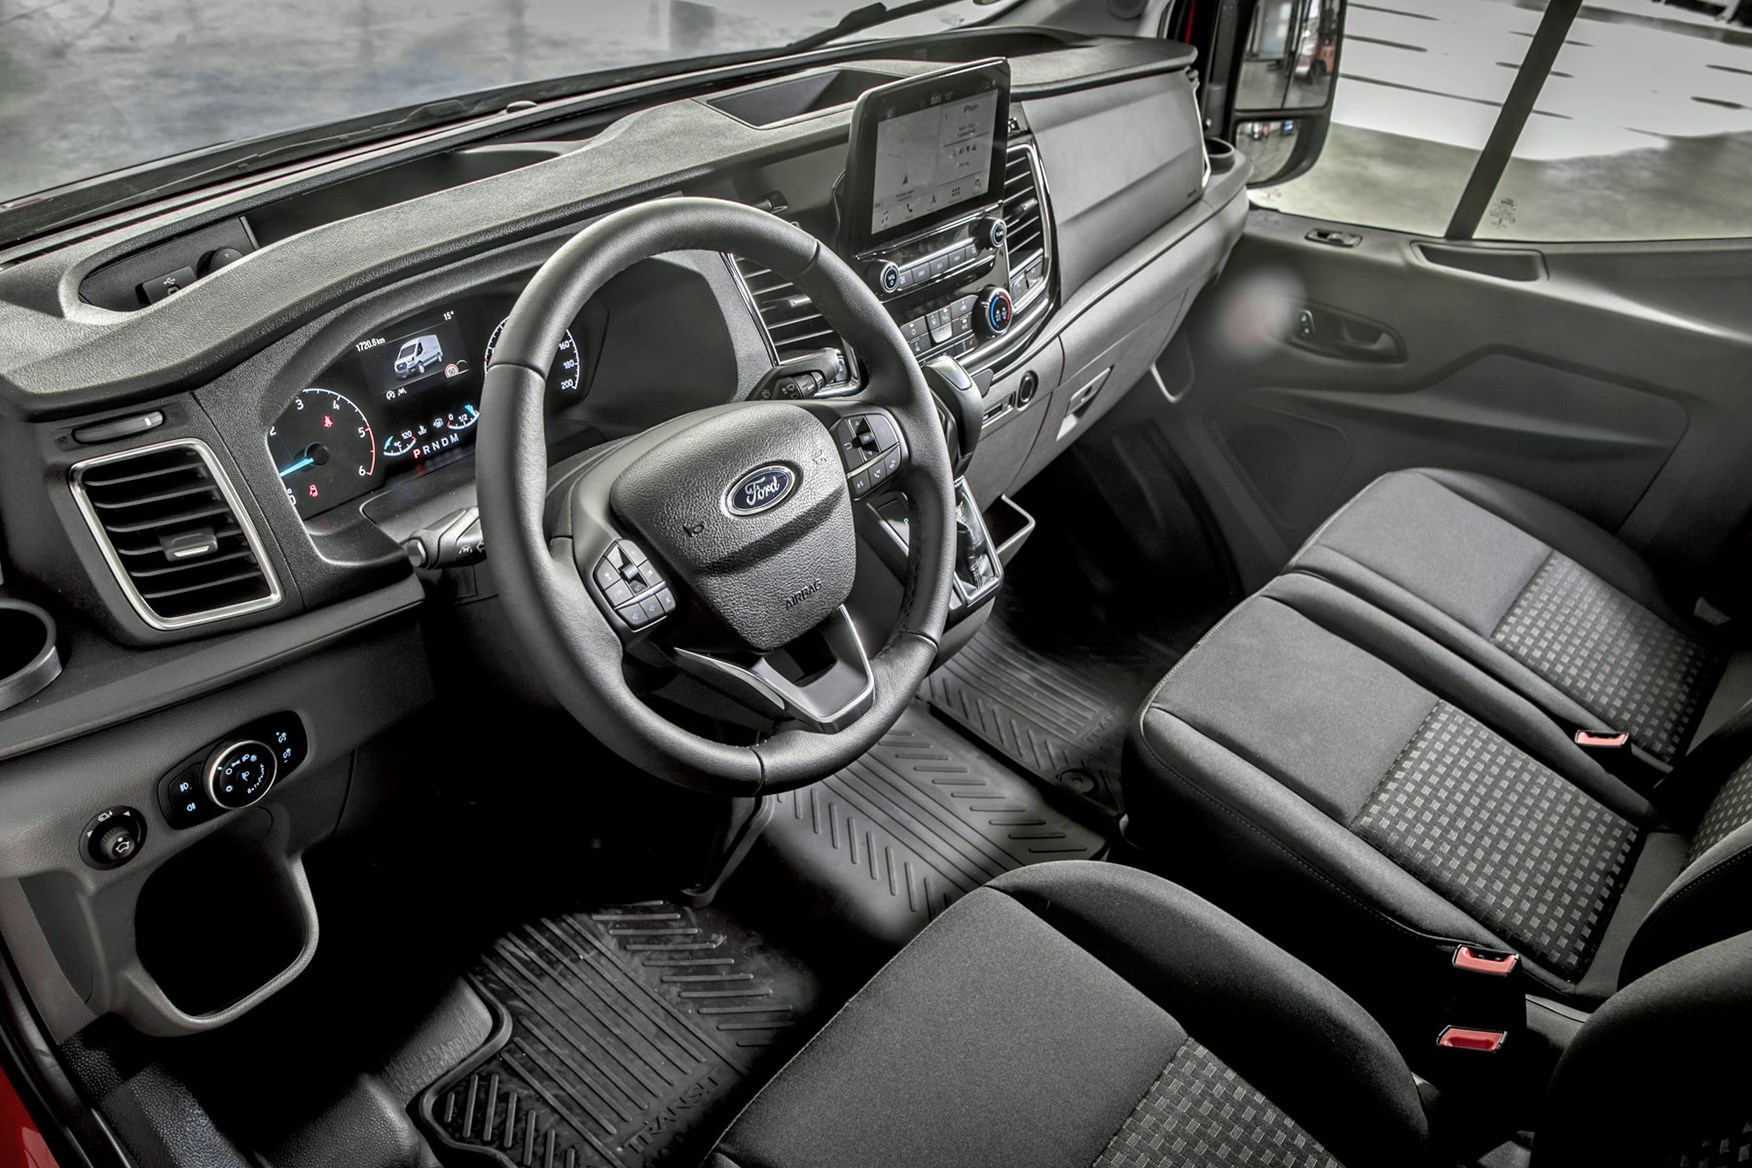 Ford Transit review - 2019 facelift model, dashboard, steering wheel, instrument cluster and Ford Sync touchscreen